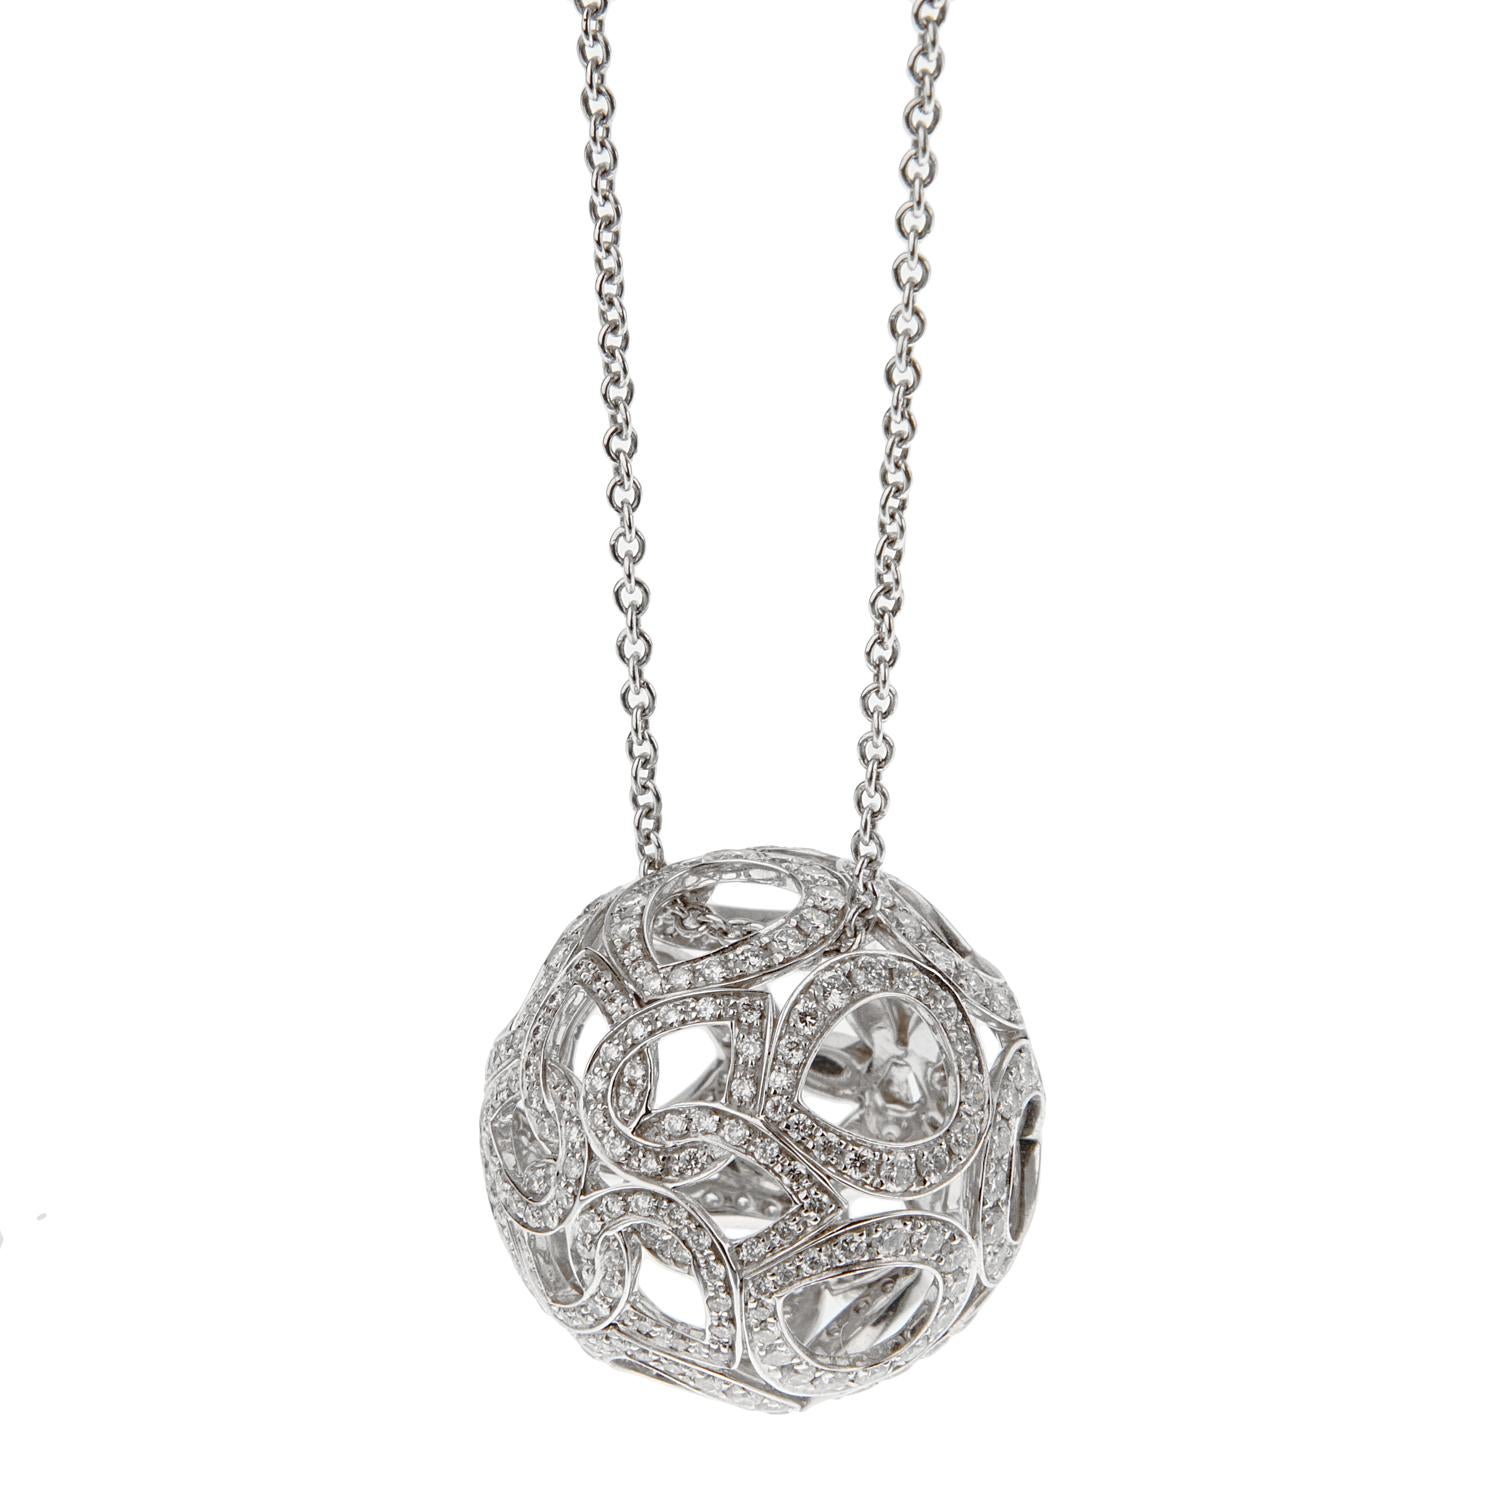 A fabulous Boucheron openwork necklace showcasing flower motifs in a circular globe adorned with 2.64ct of the finest original Boucheron round brilliant cut diamonds. The pendant is suspended by a Boucheron white gold necklace with 3 stations so it